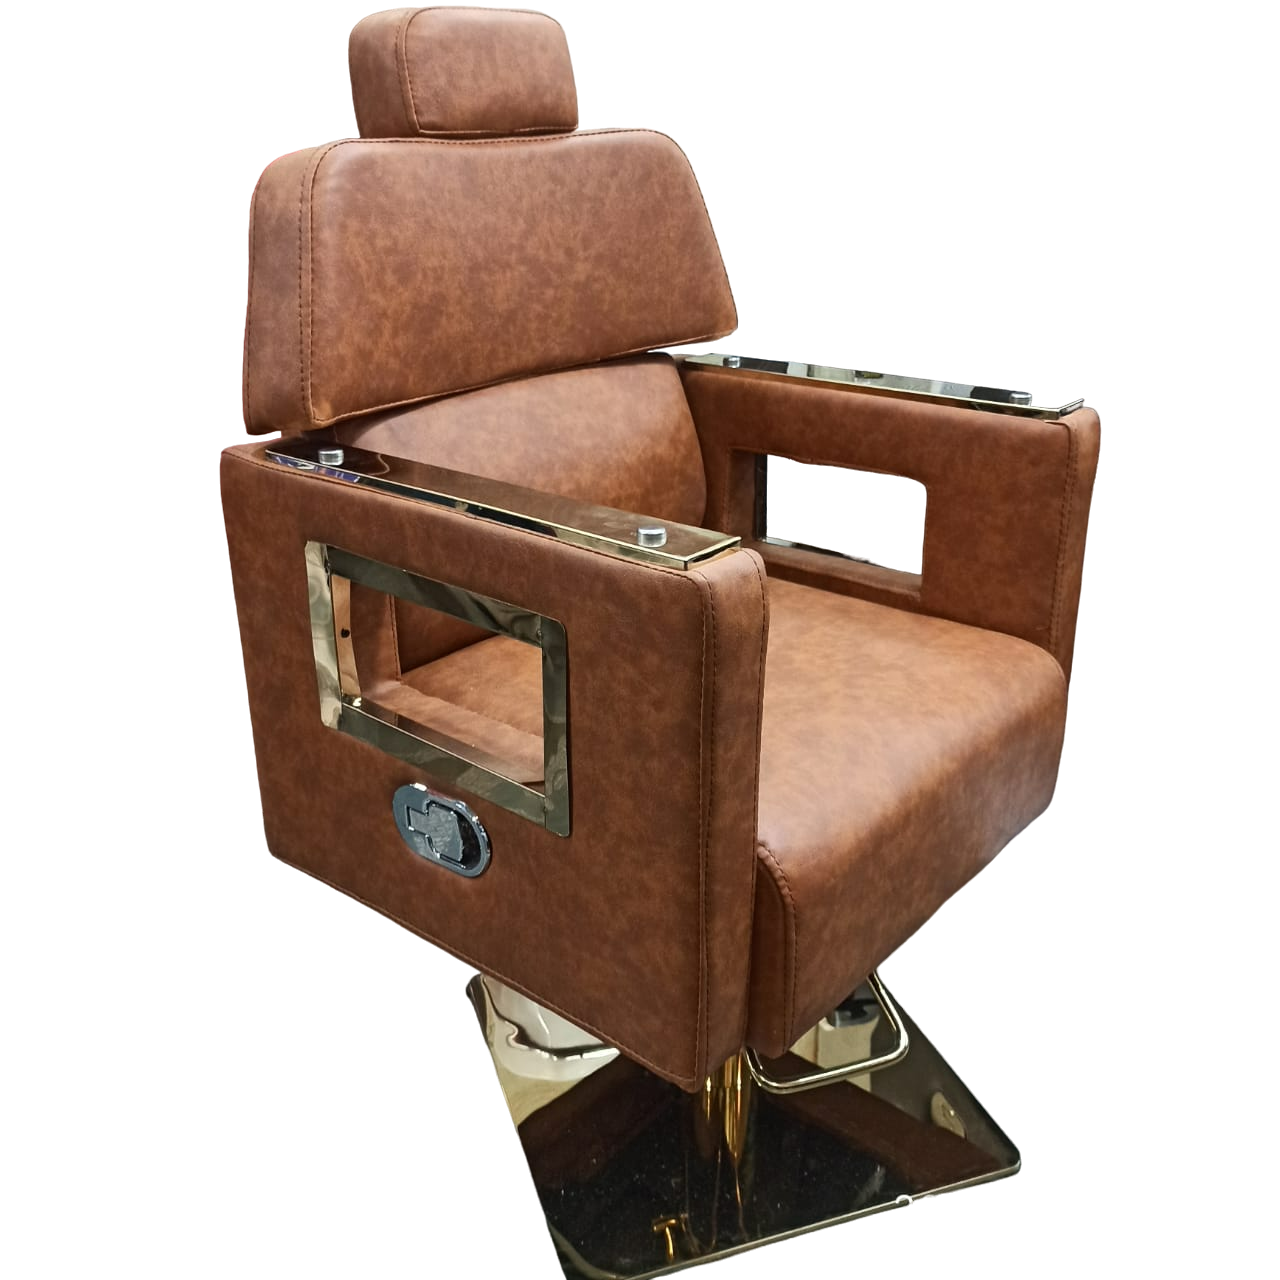 Premium Camera Handle Salon Chair With Height Adjustable Hydraulic Pump and Seat Recliner